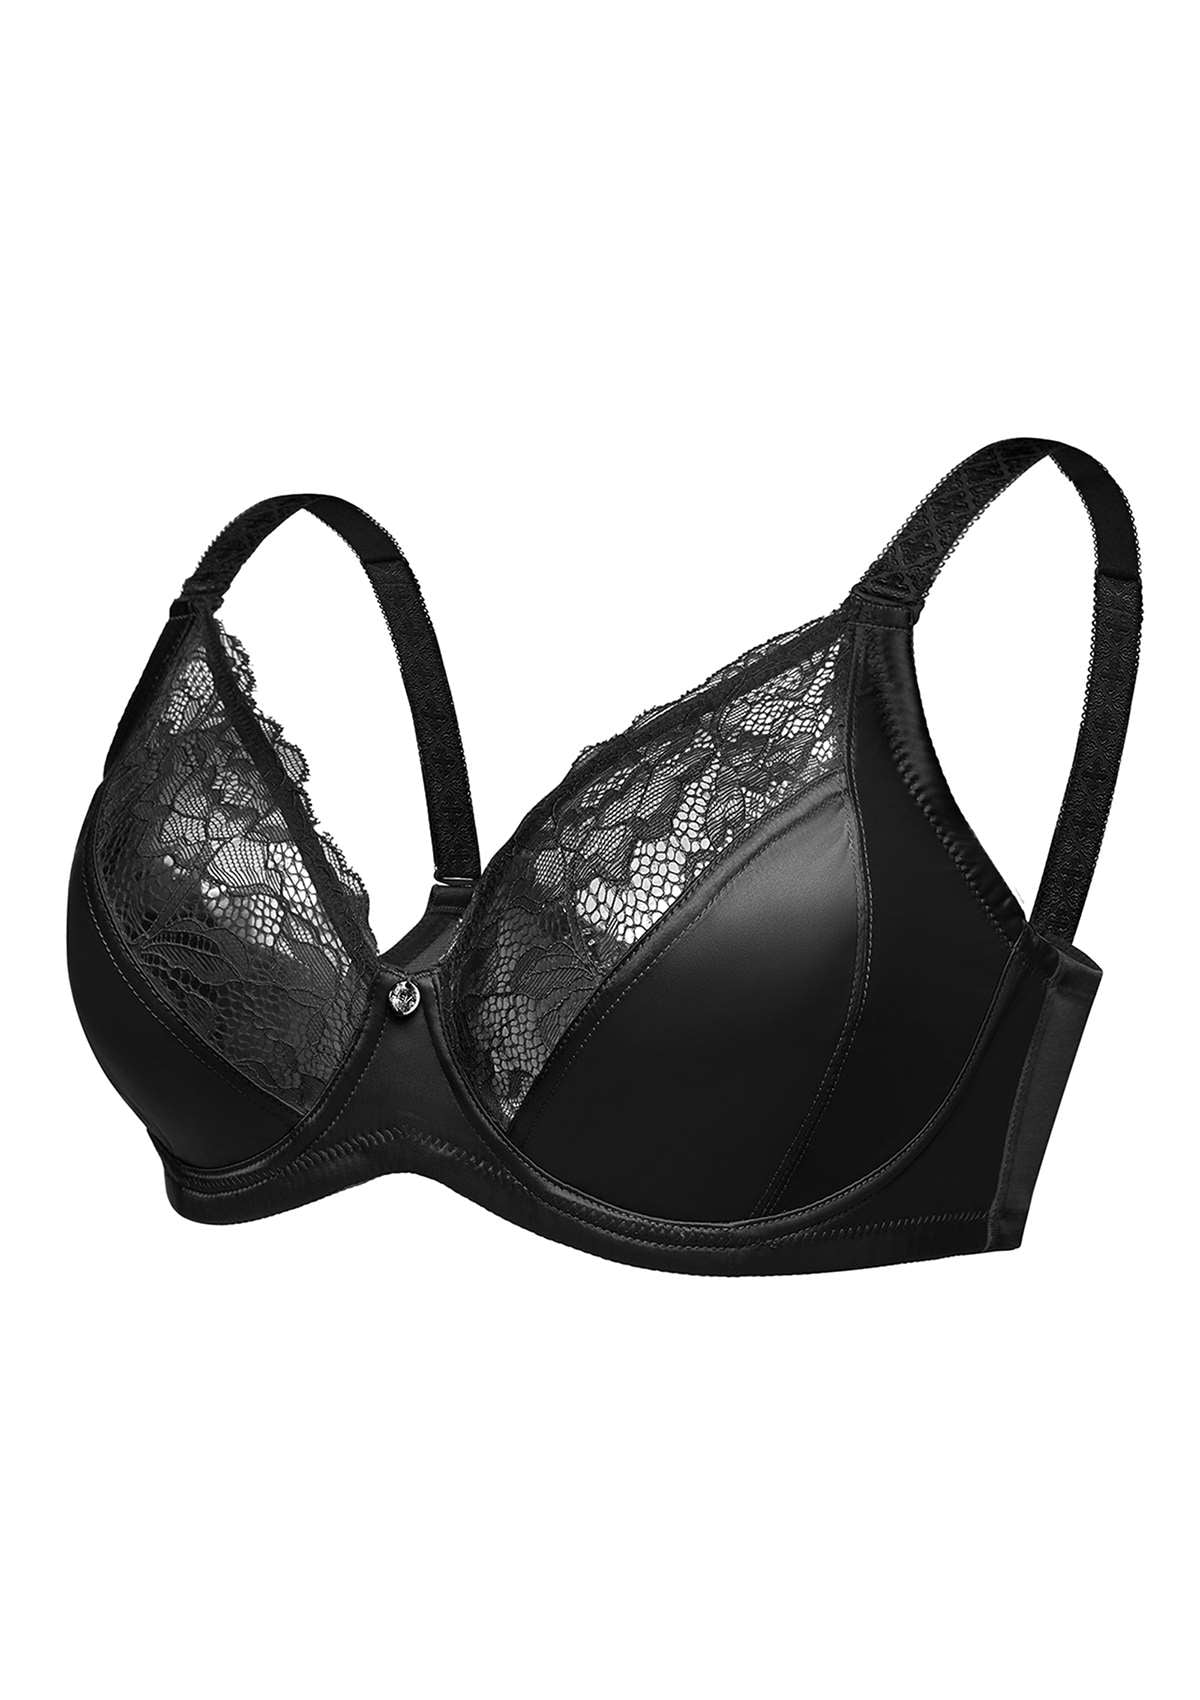 HSIA Foxy Satin Silky Full Coverage Underwire Bra With Floral Lace Trim - Black / 44 / C